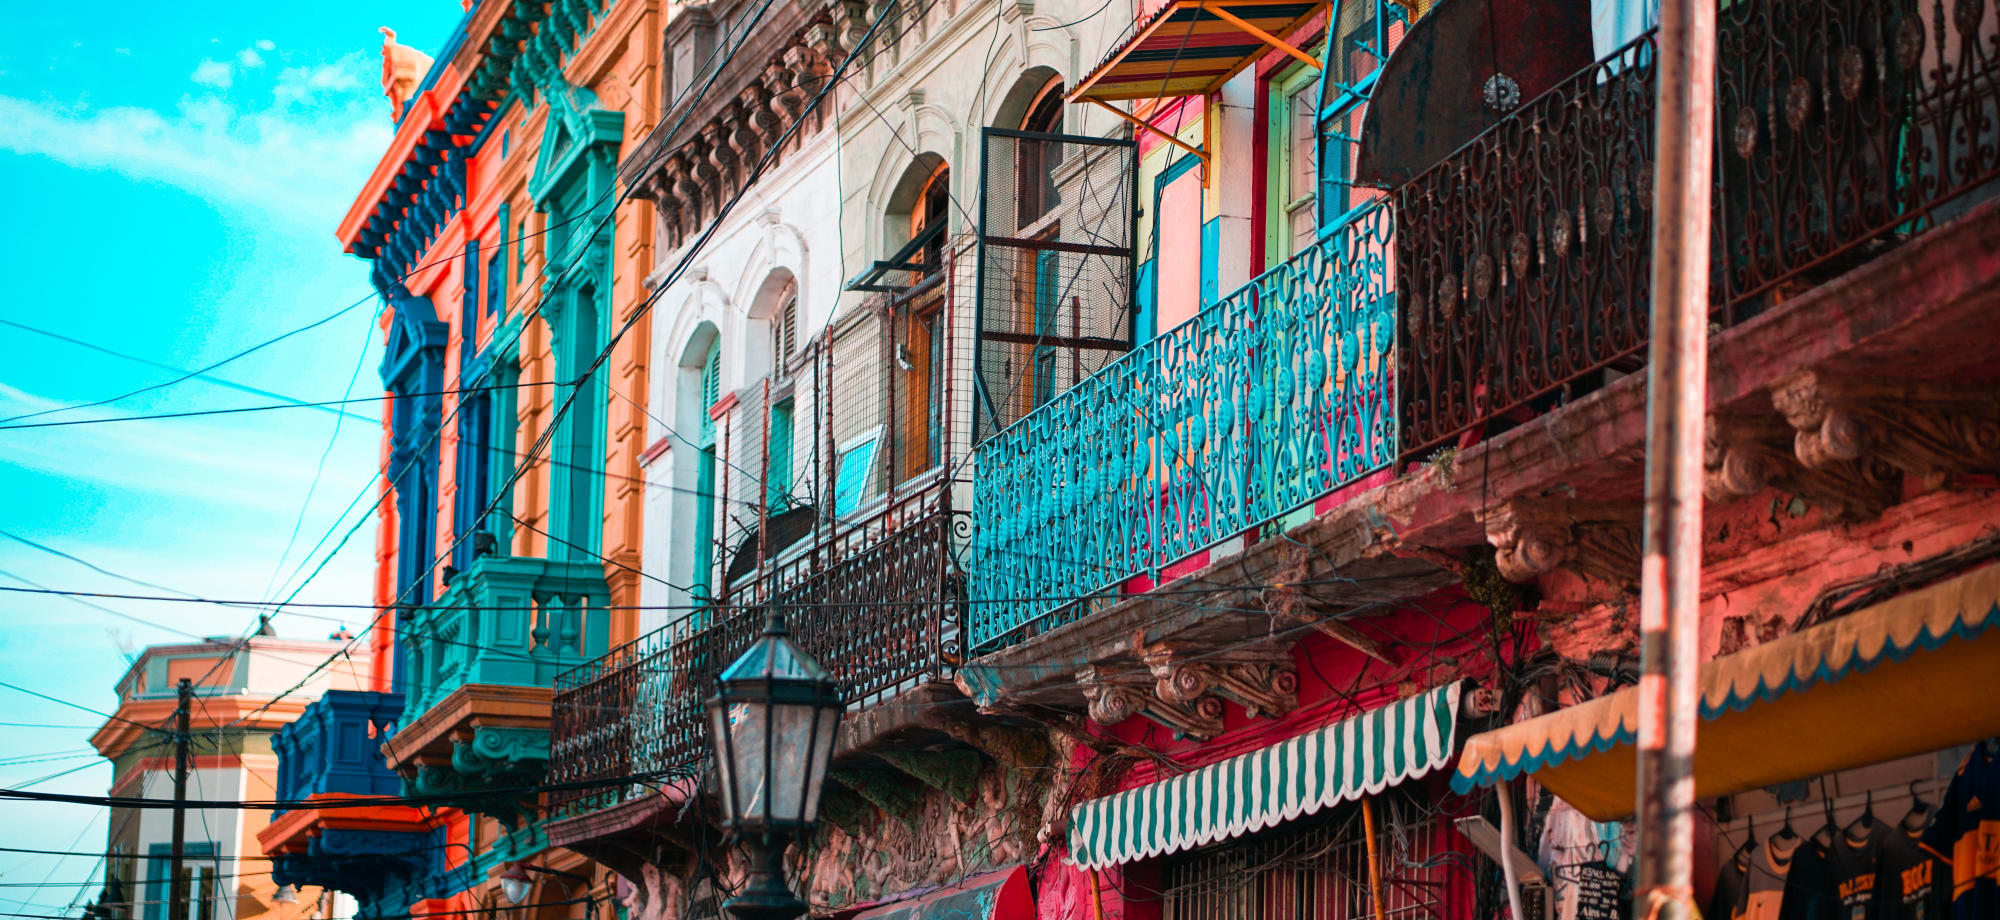 The architecture in Buenos Aries is colourful, with lots of period-style balconies, Victorian lamps and shutters. 